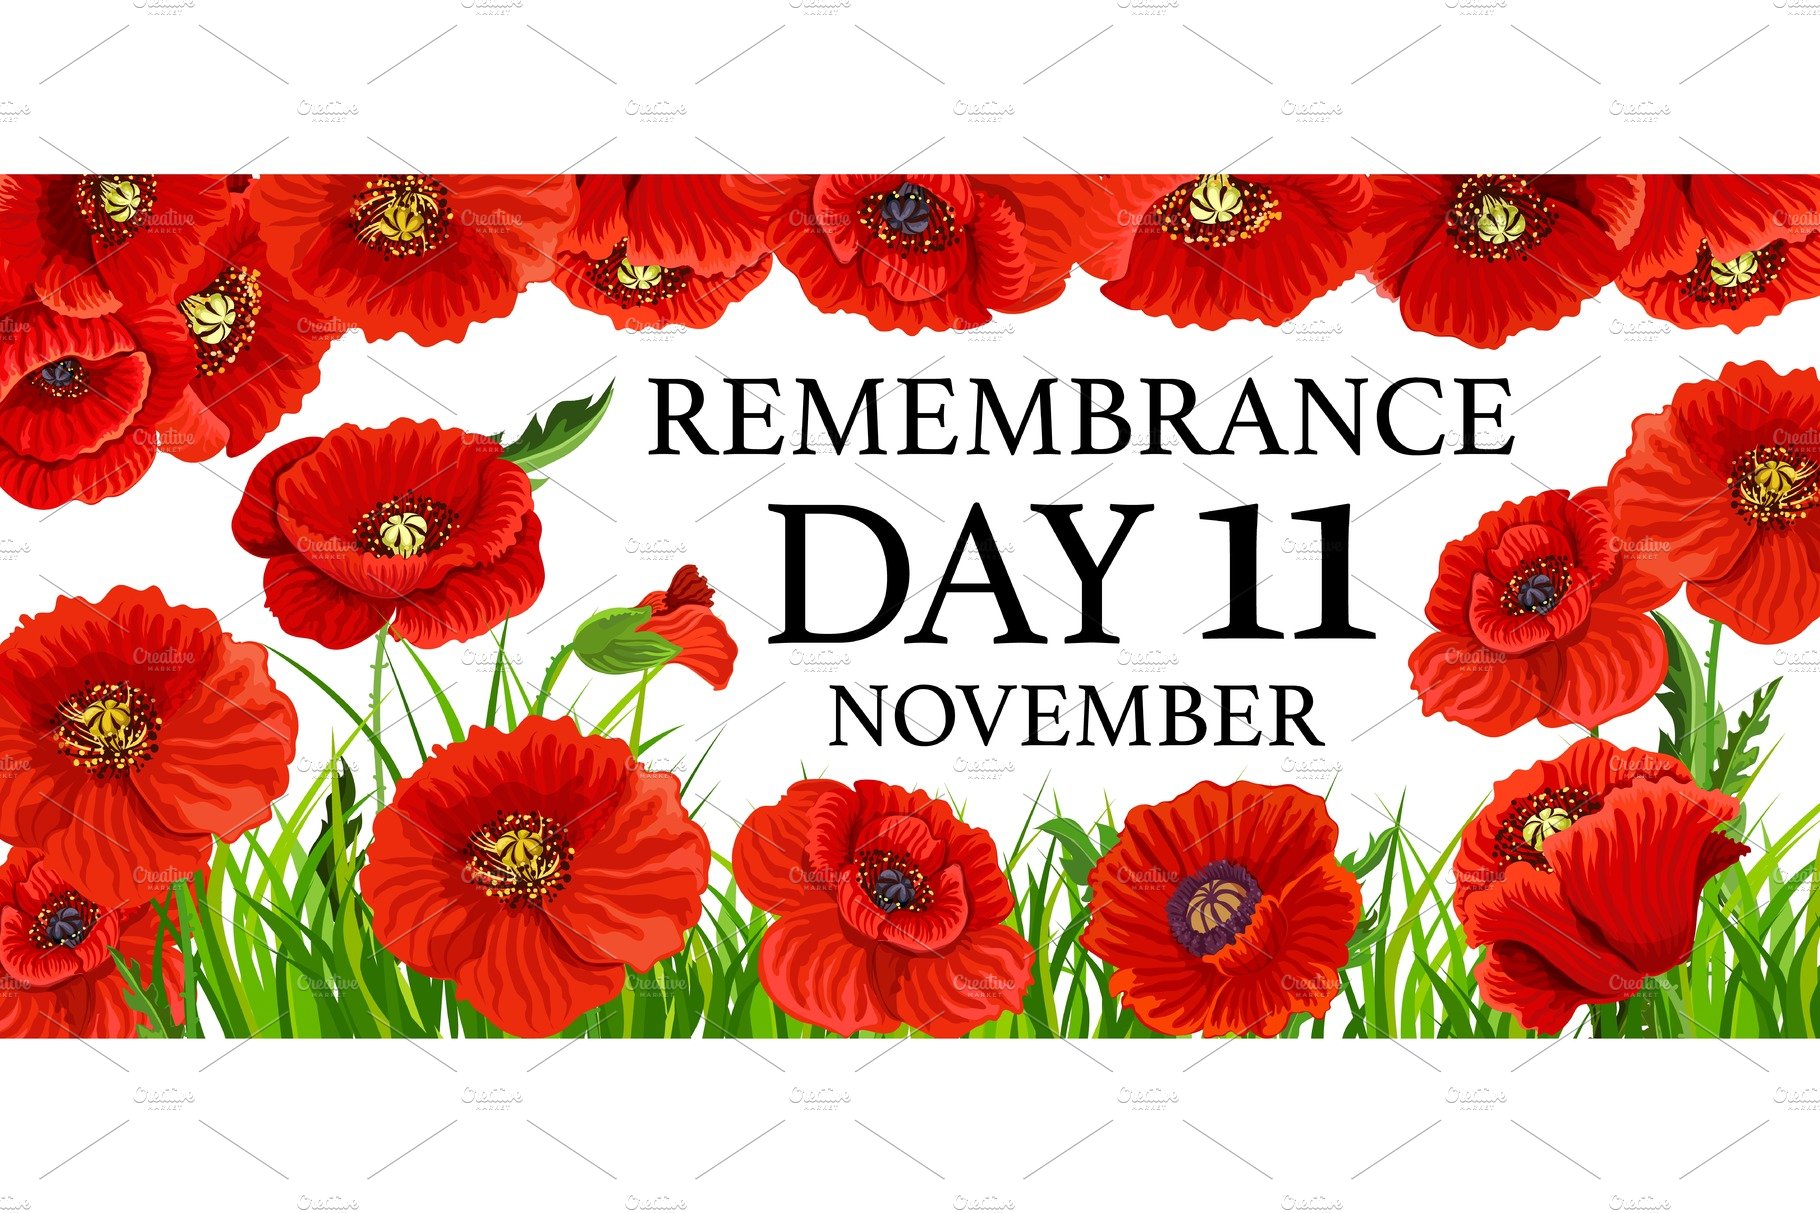 11 November remembrance day cover image.